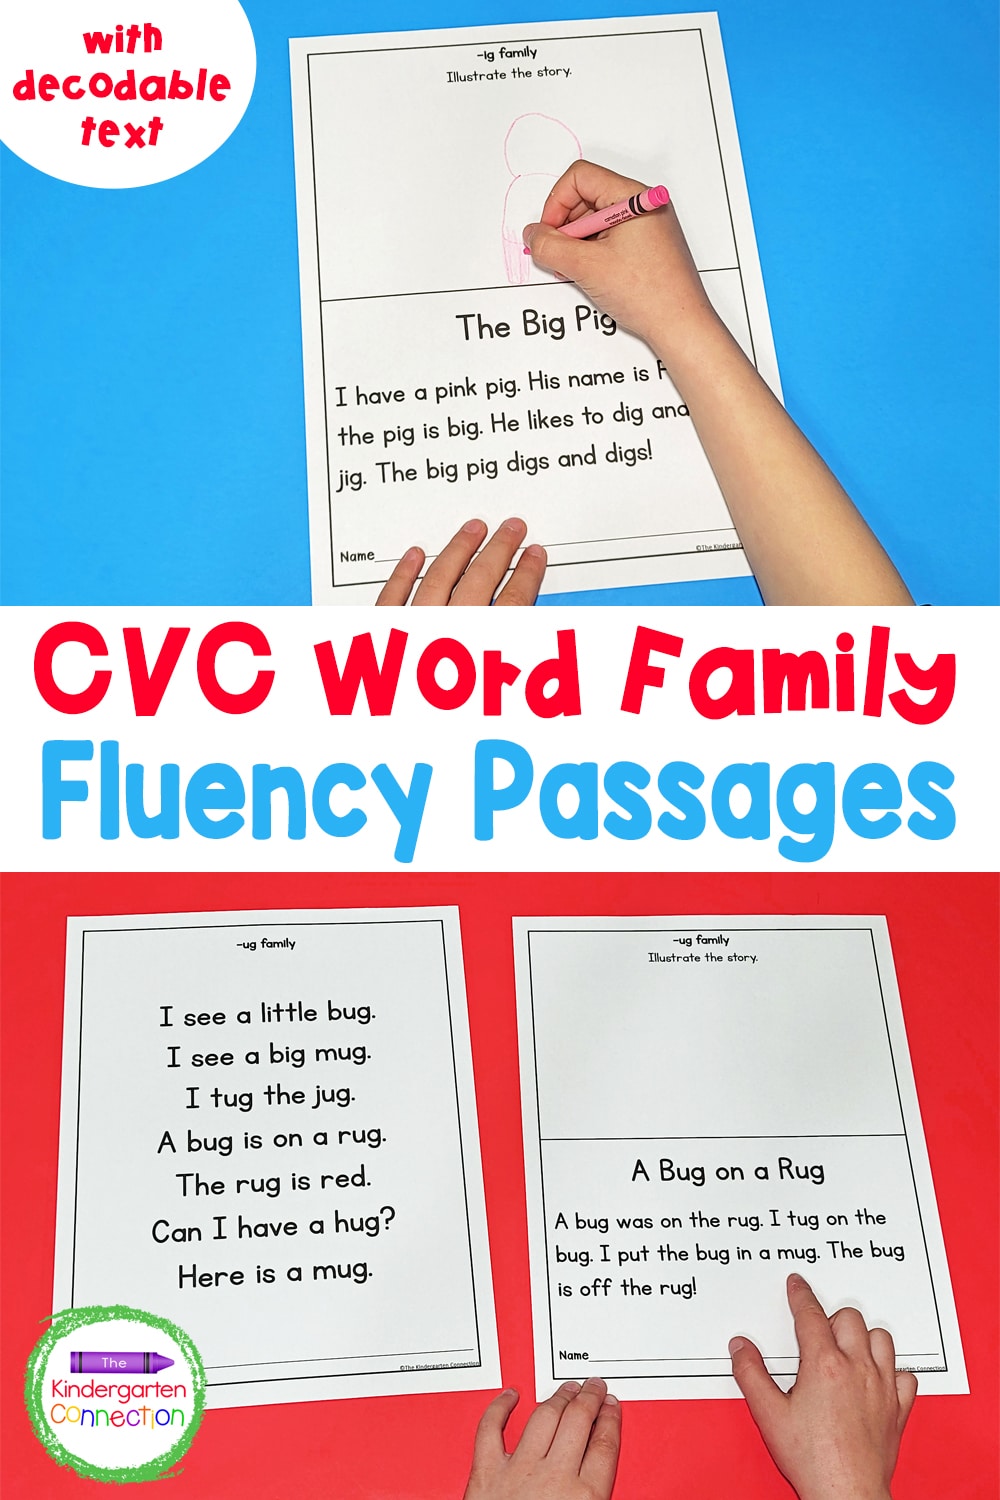 CVC Word Family Fluency Passages for Early Readers